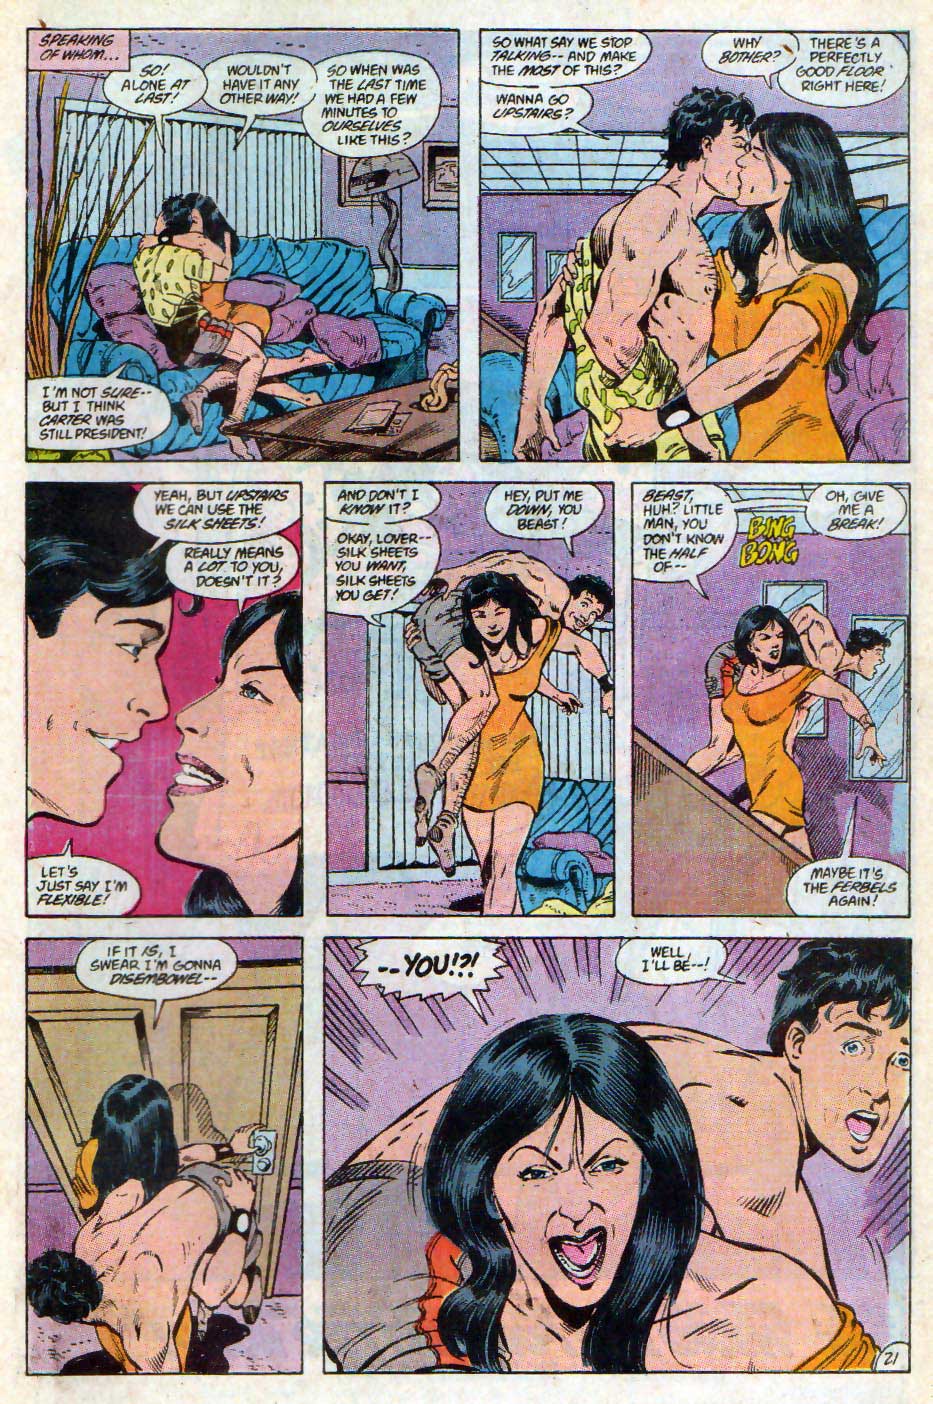 Mister Miracle #8 - Plot by J. M. DeMatteis, Script by Len Wein, art by Joe Phillips and Pablo Marcos